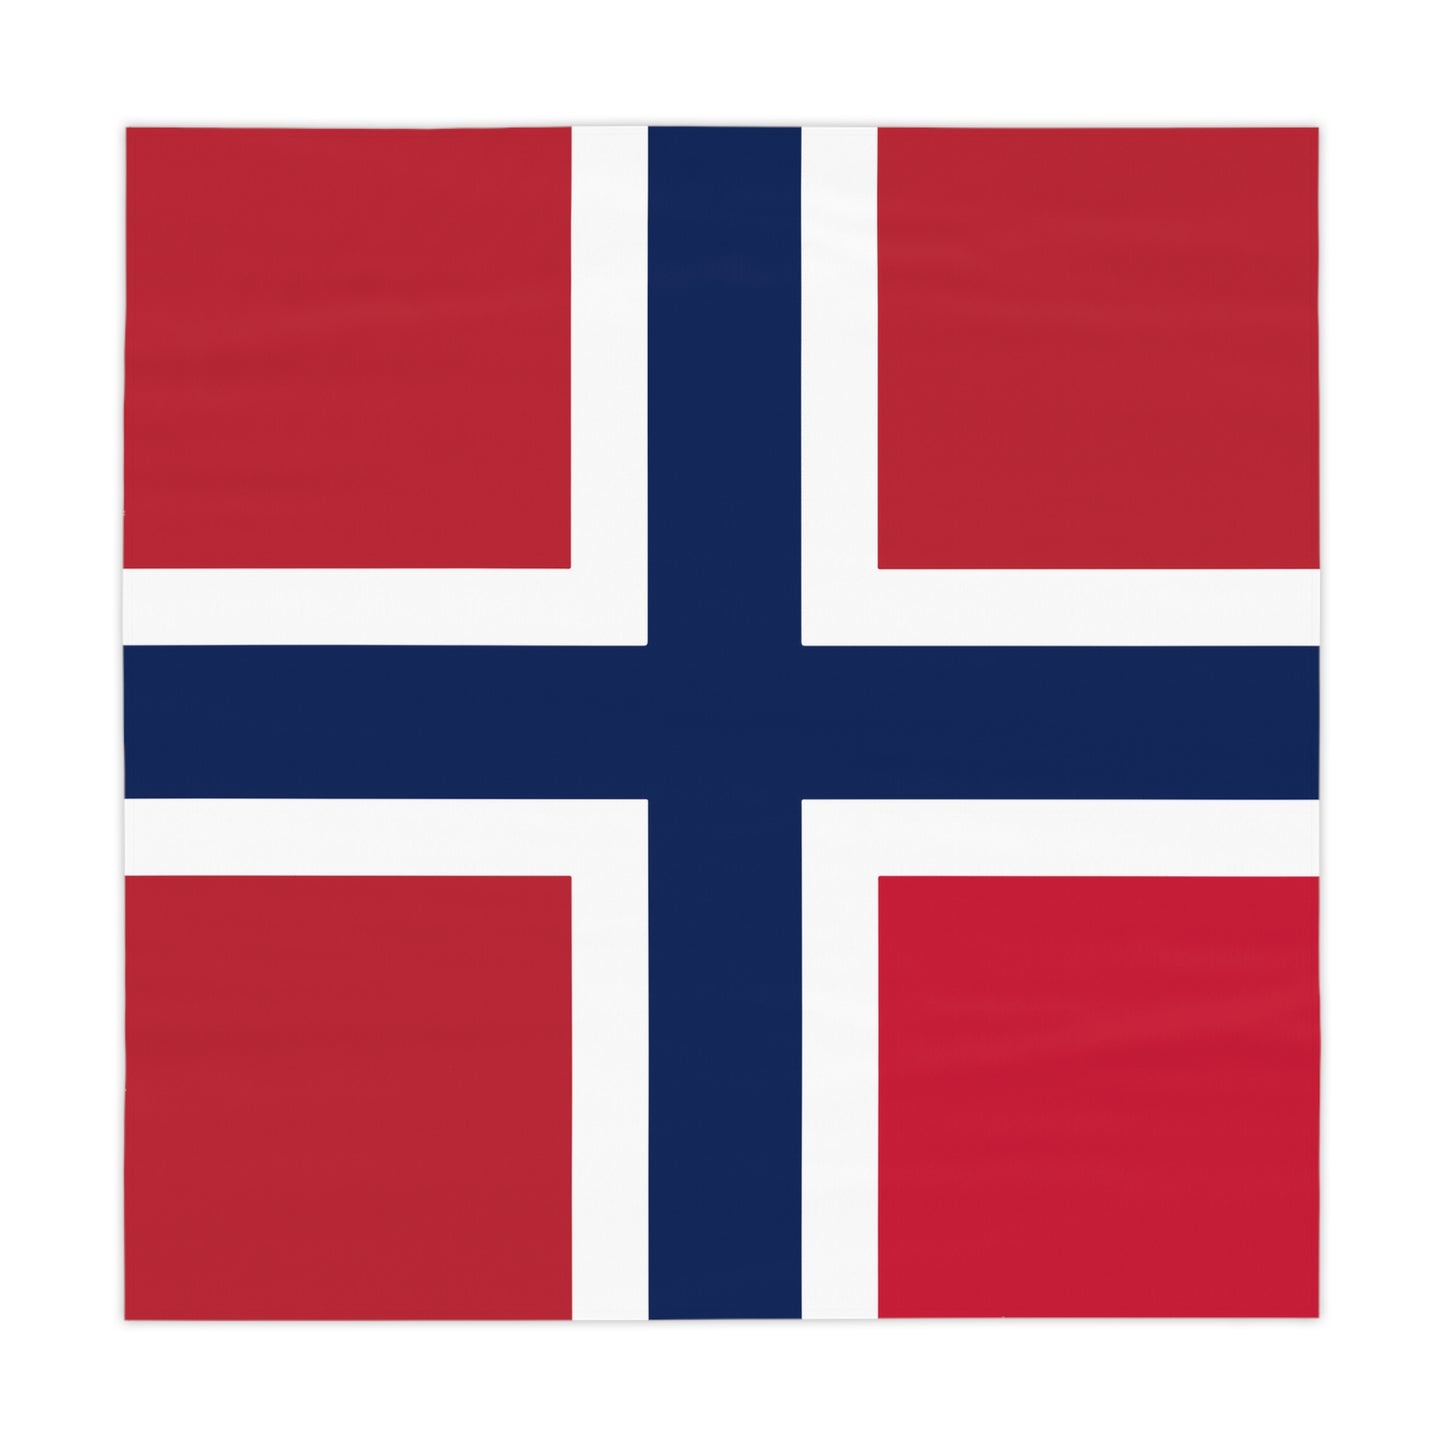 Norway Flag Tablecloth Norwegian Flag Tablecloth May 17th Decorations Syttende Mai Party